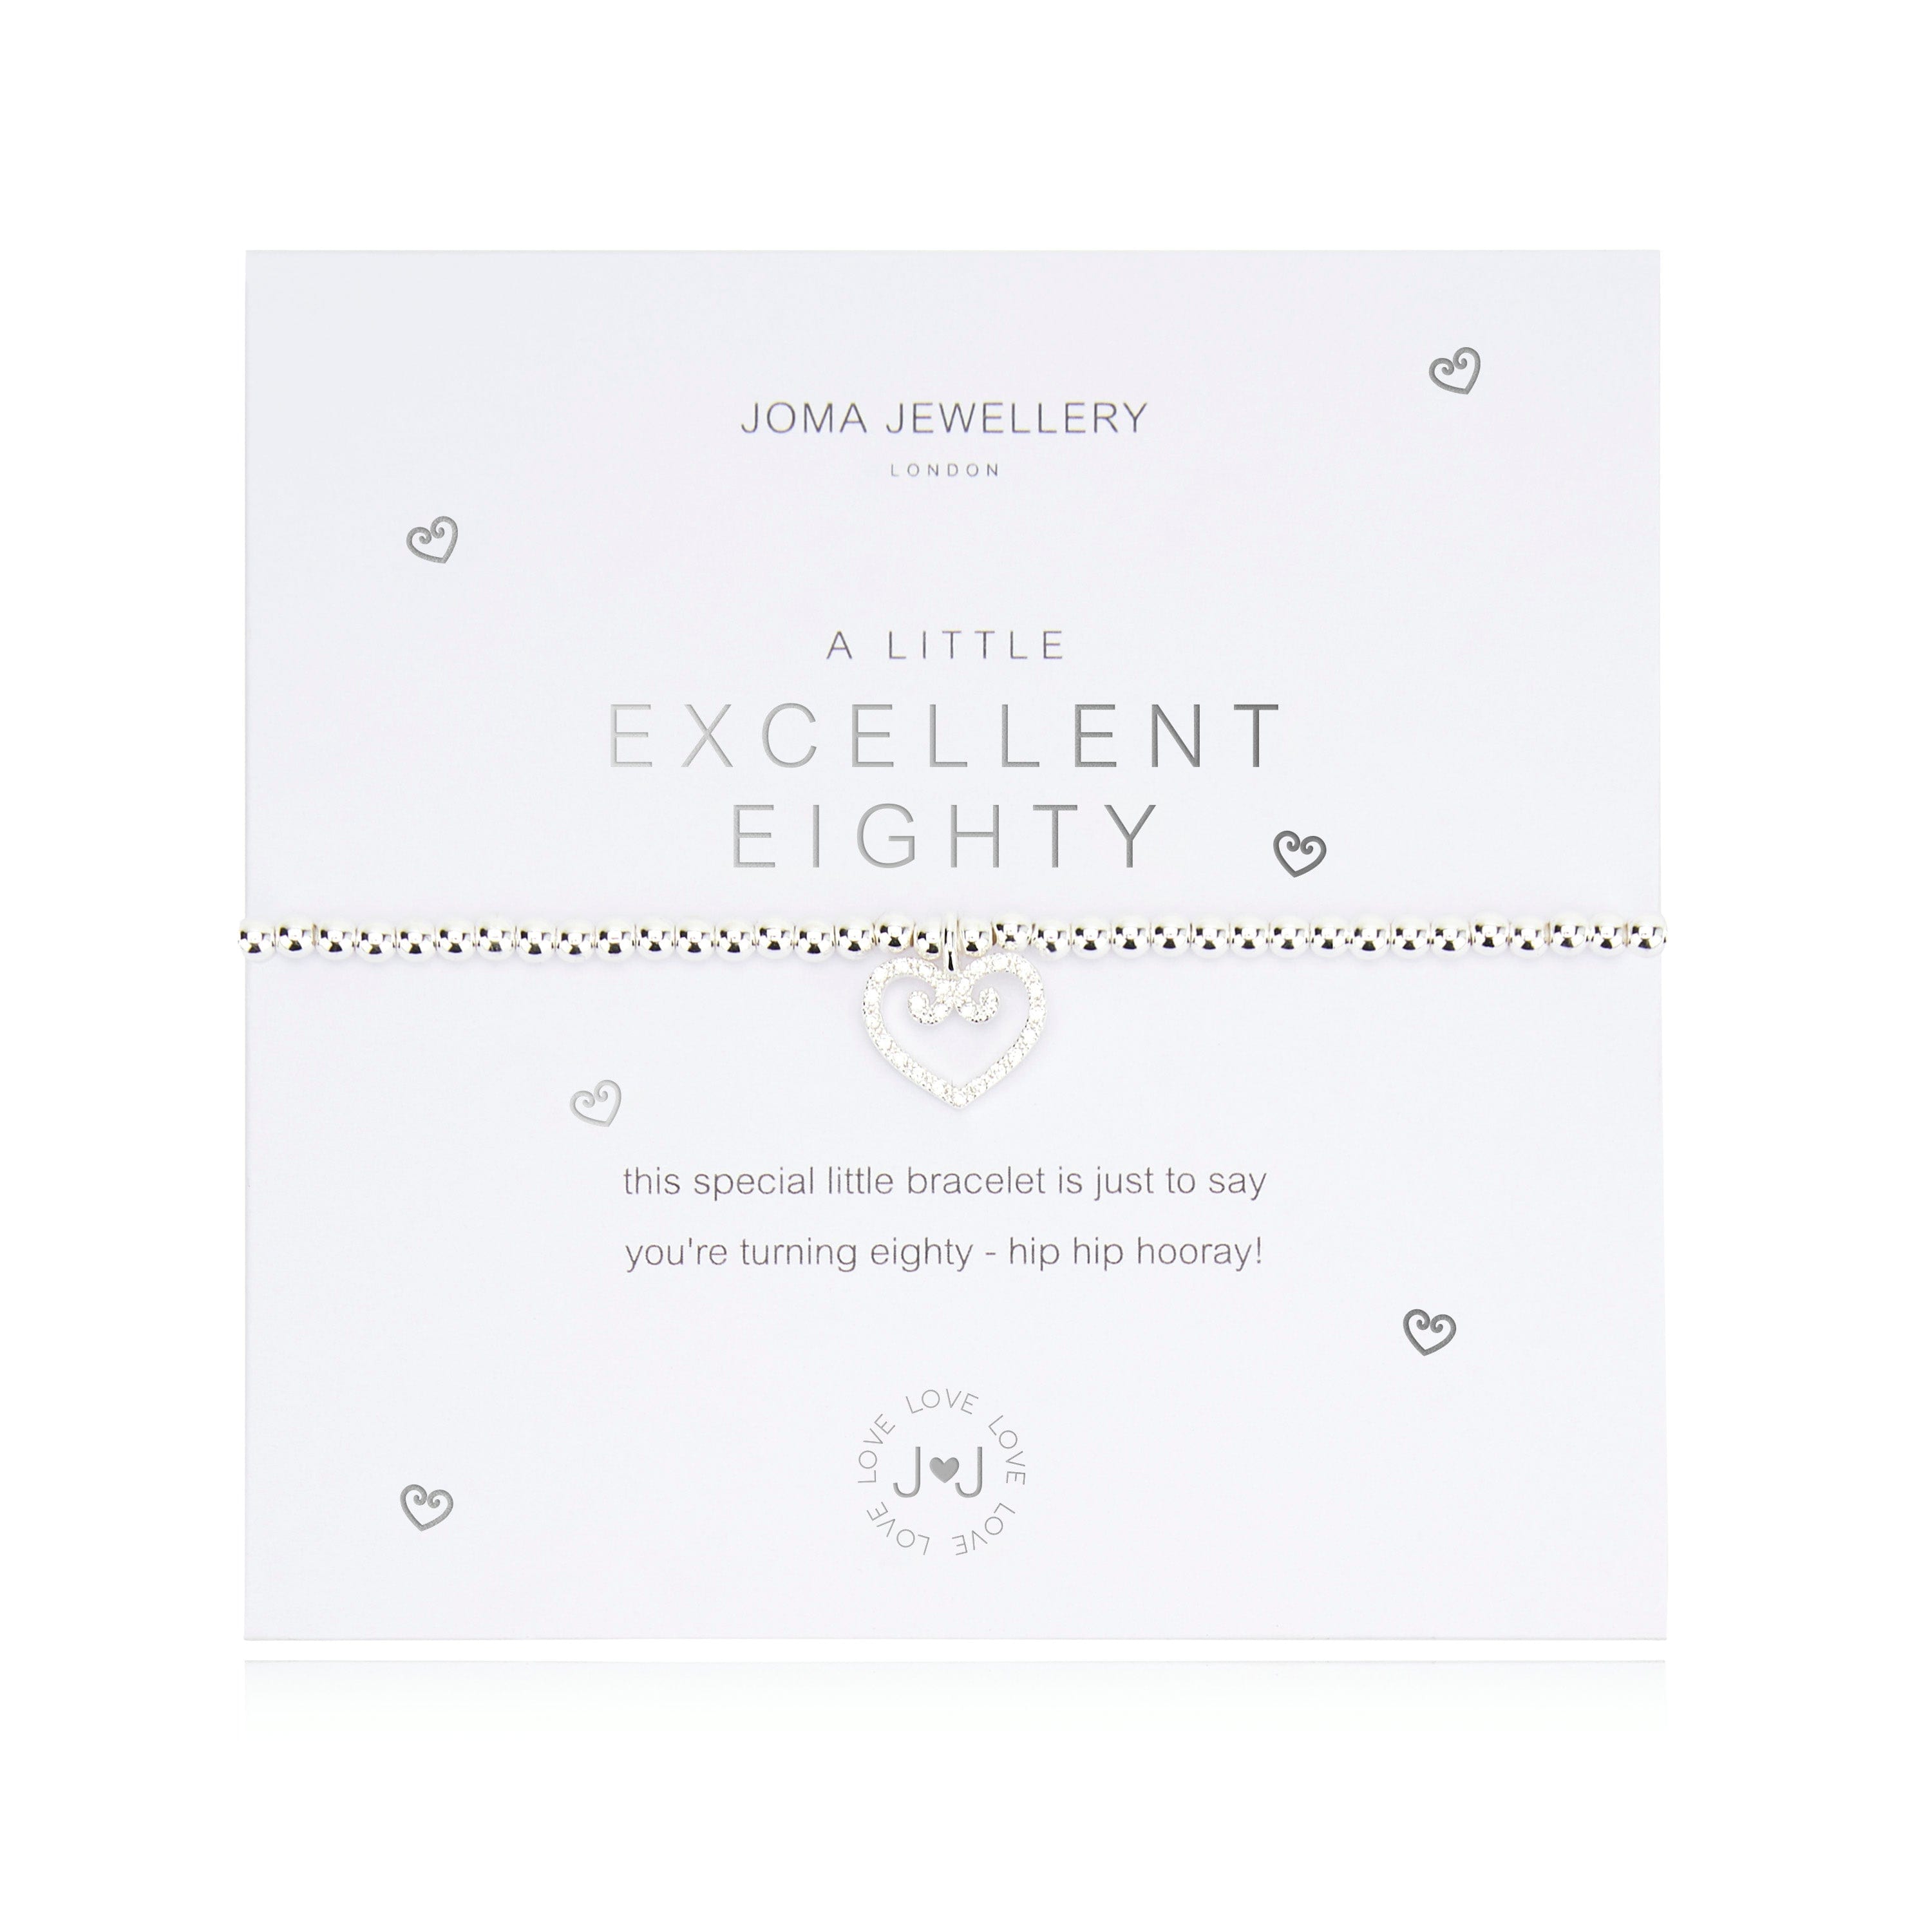 Joma Jewellery Bracelet Joma Jewellery Bracelet - A Little Excellent Eighty